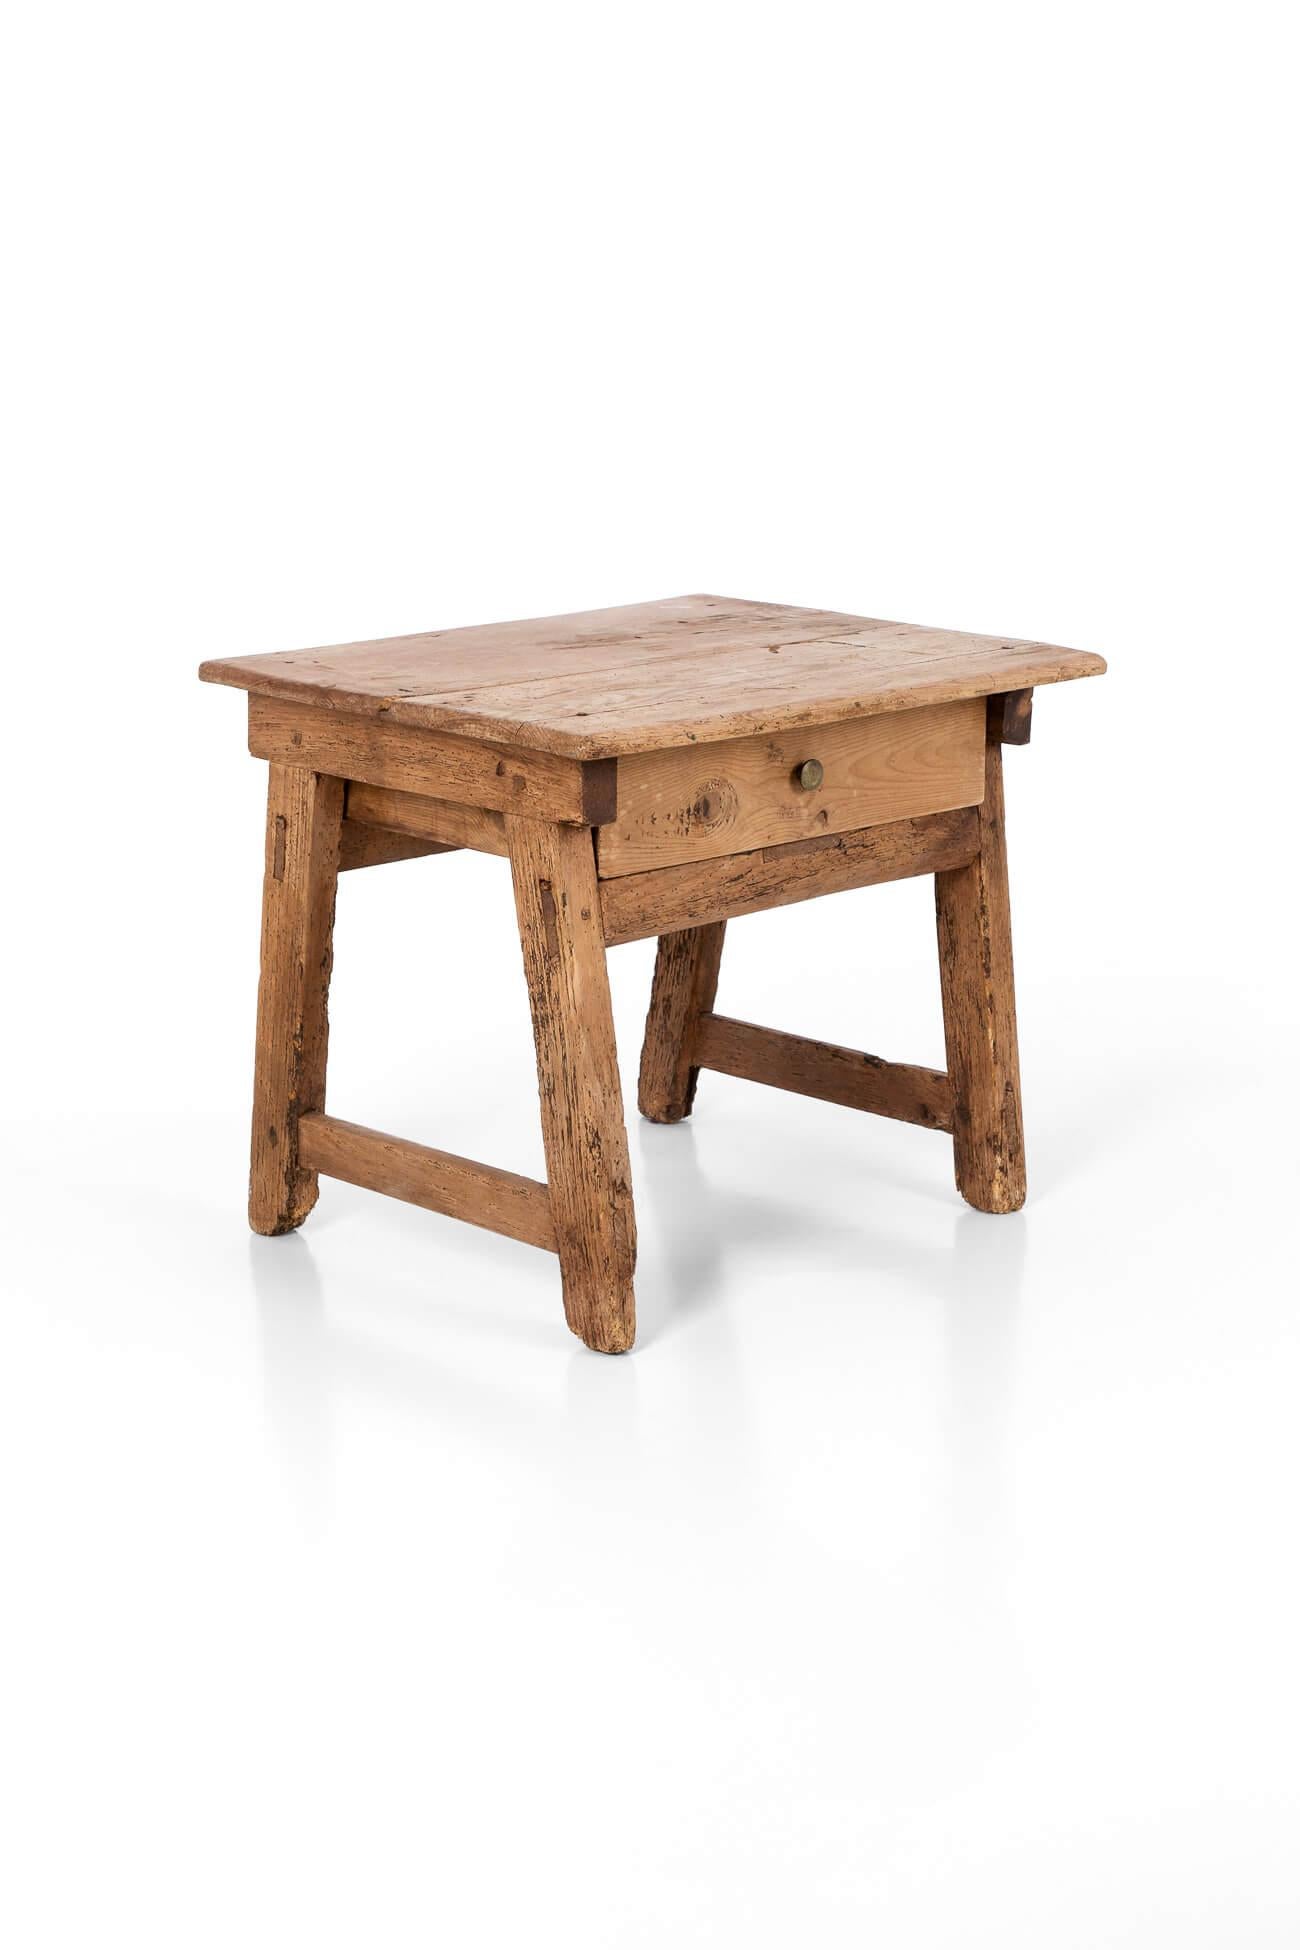 A superb early 19th century side table of pegged construction in elm.

Sourced from a convent dating back to 1650 in the Catalonia region of Spain.

Four block legs united by parallel stretchers.

Spanish, circa 1800.

H: 59 CM  H: 23.2 INCHES

D: